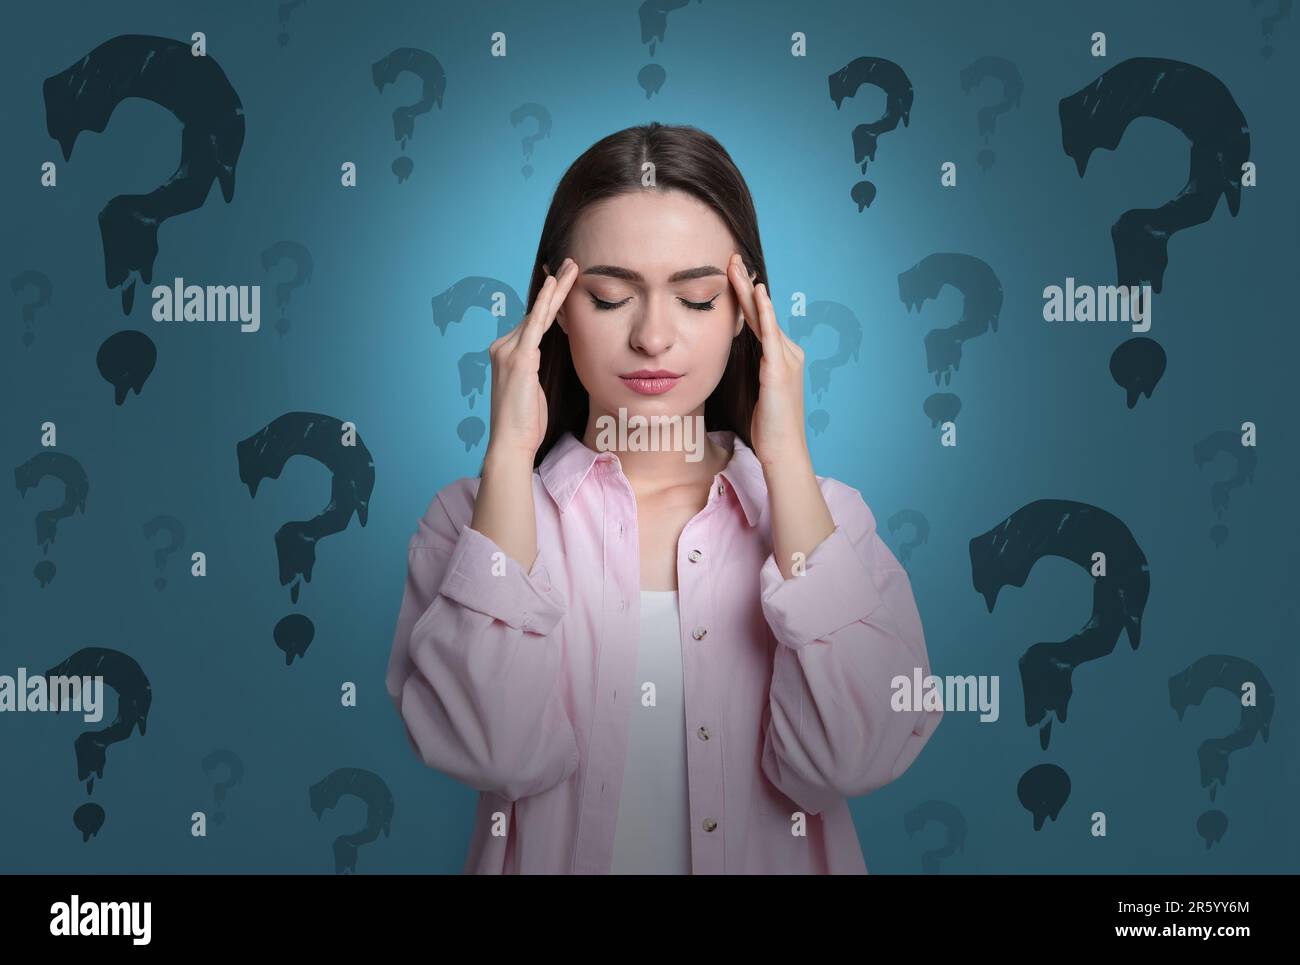 Amnesia concept. Woman trying to remember something. Question marks on color background symbolizing memory loss Stock Photo